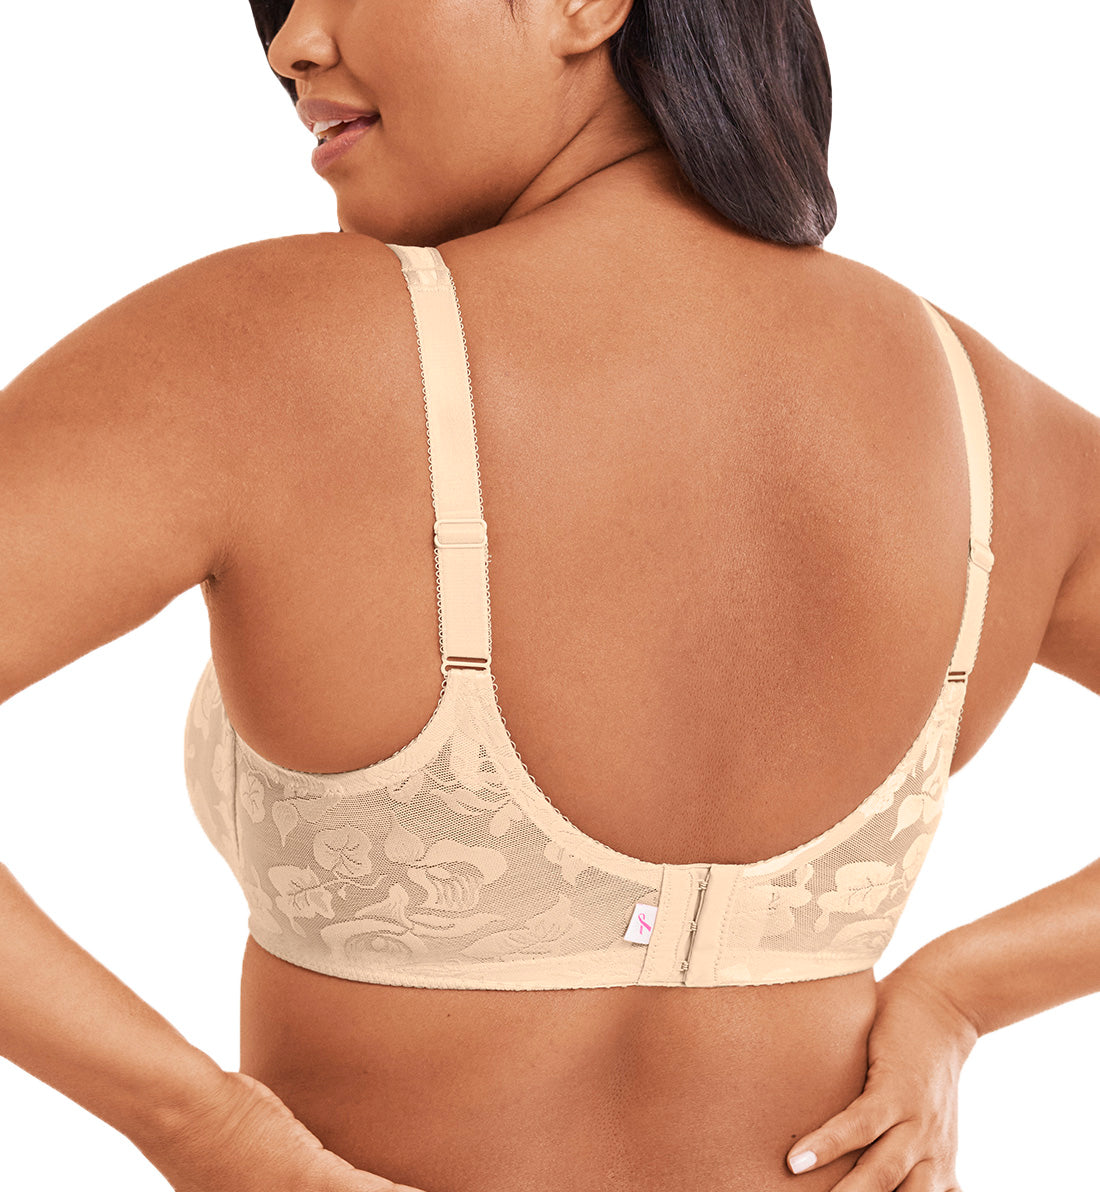 Wacoal Halo Lace Seamless Underwire J-Hook Bra Natural Nude